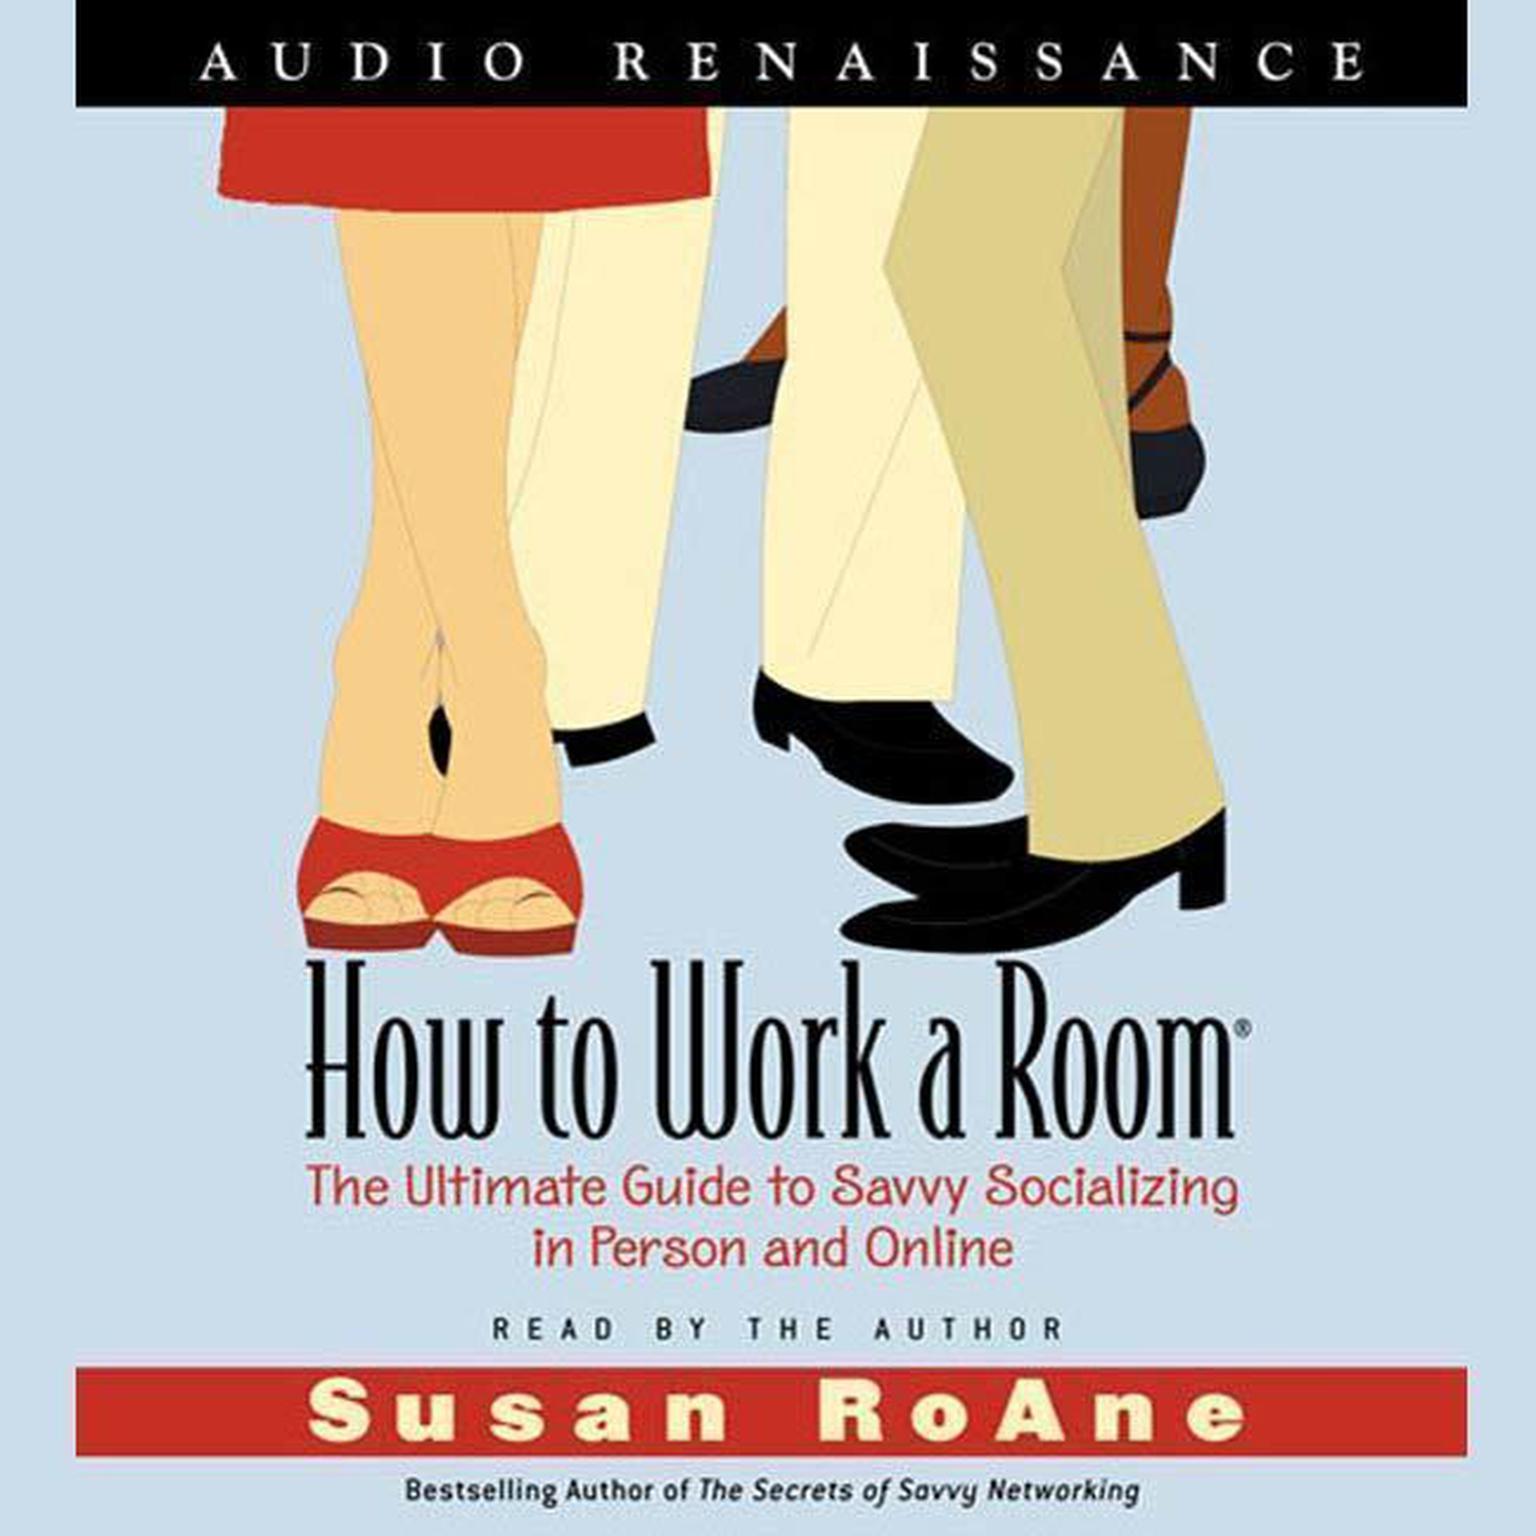 How to Work a Room (Abridged): The Ultimate Guide to Savvy Socializing In Person and Online Audiobook, by Susan RoAne